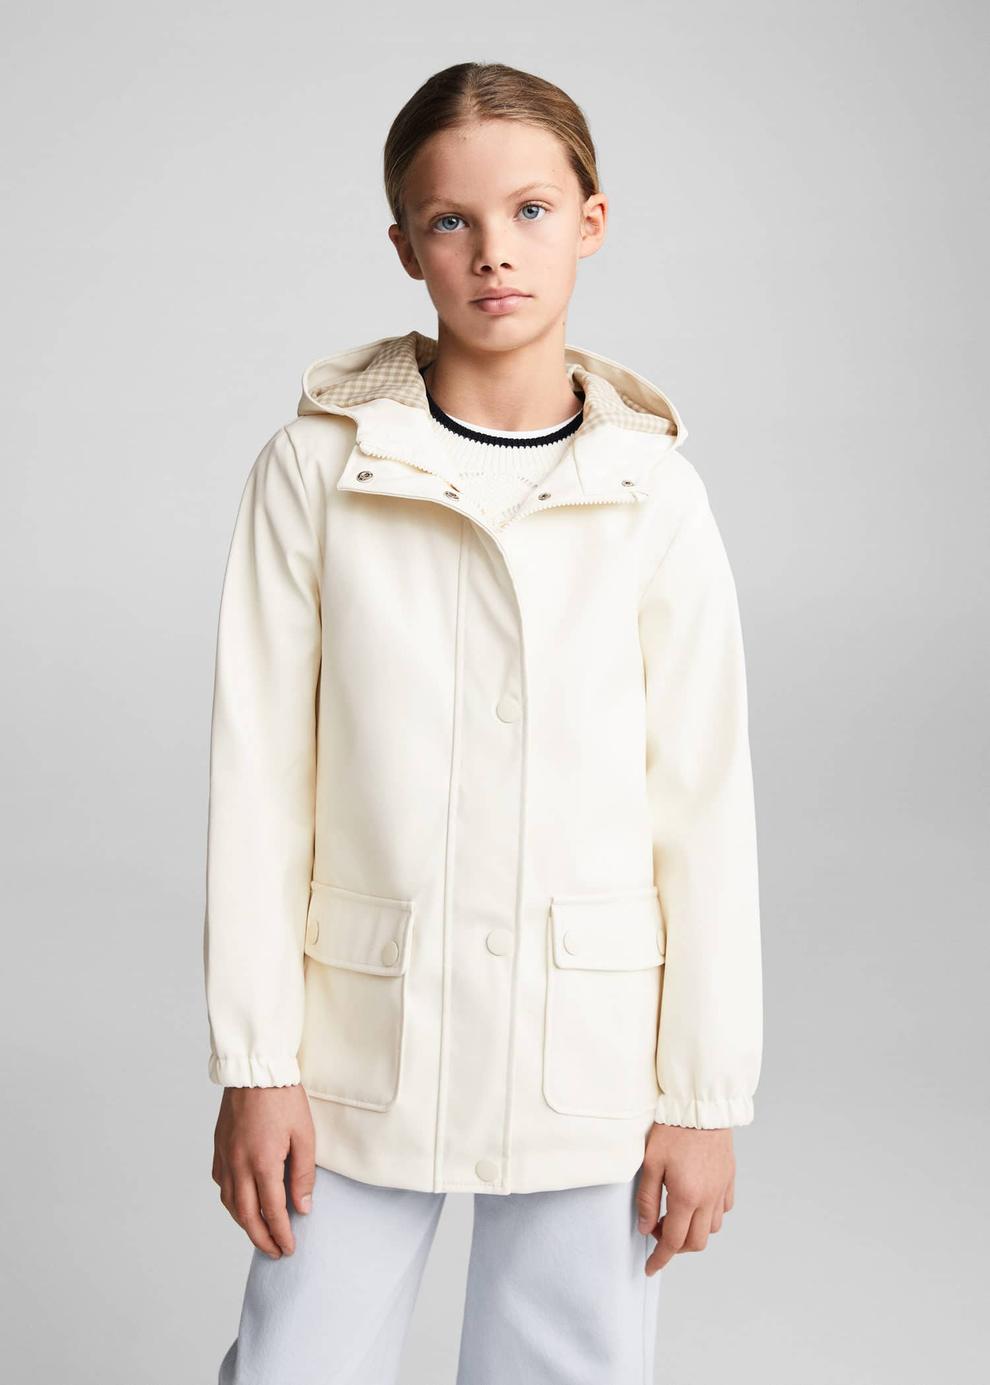 Raincoat hooded jacket offers at S$ 69.9 in Mango Kids